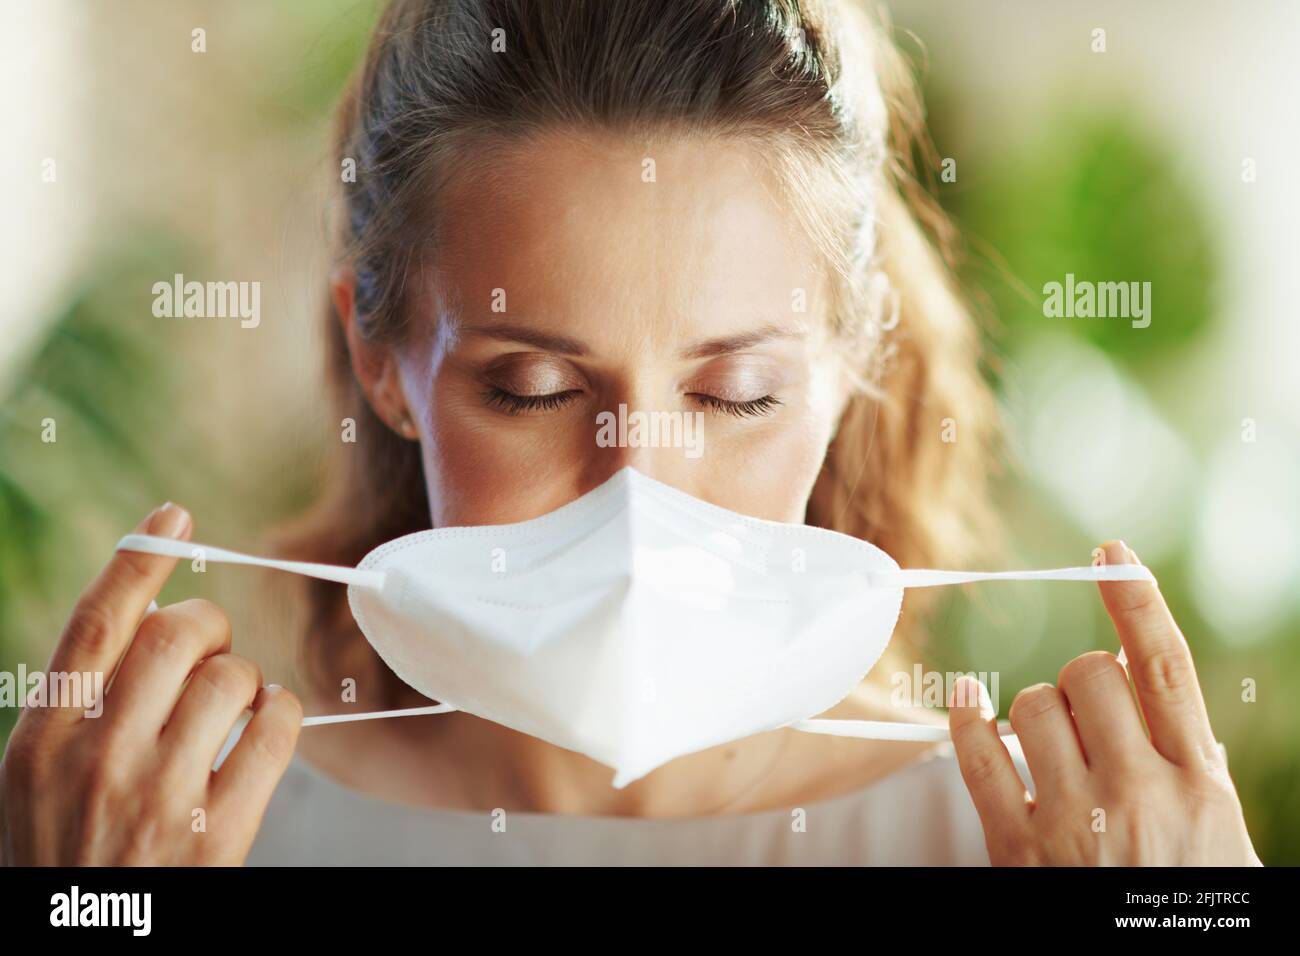 covid-19 pandemic. trendy 40 years old woman in grey blouse wearing ffp2 mask. Stock Photo